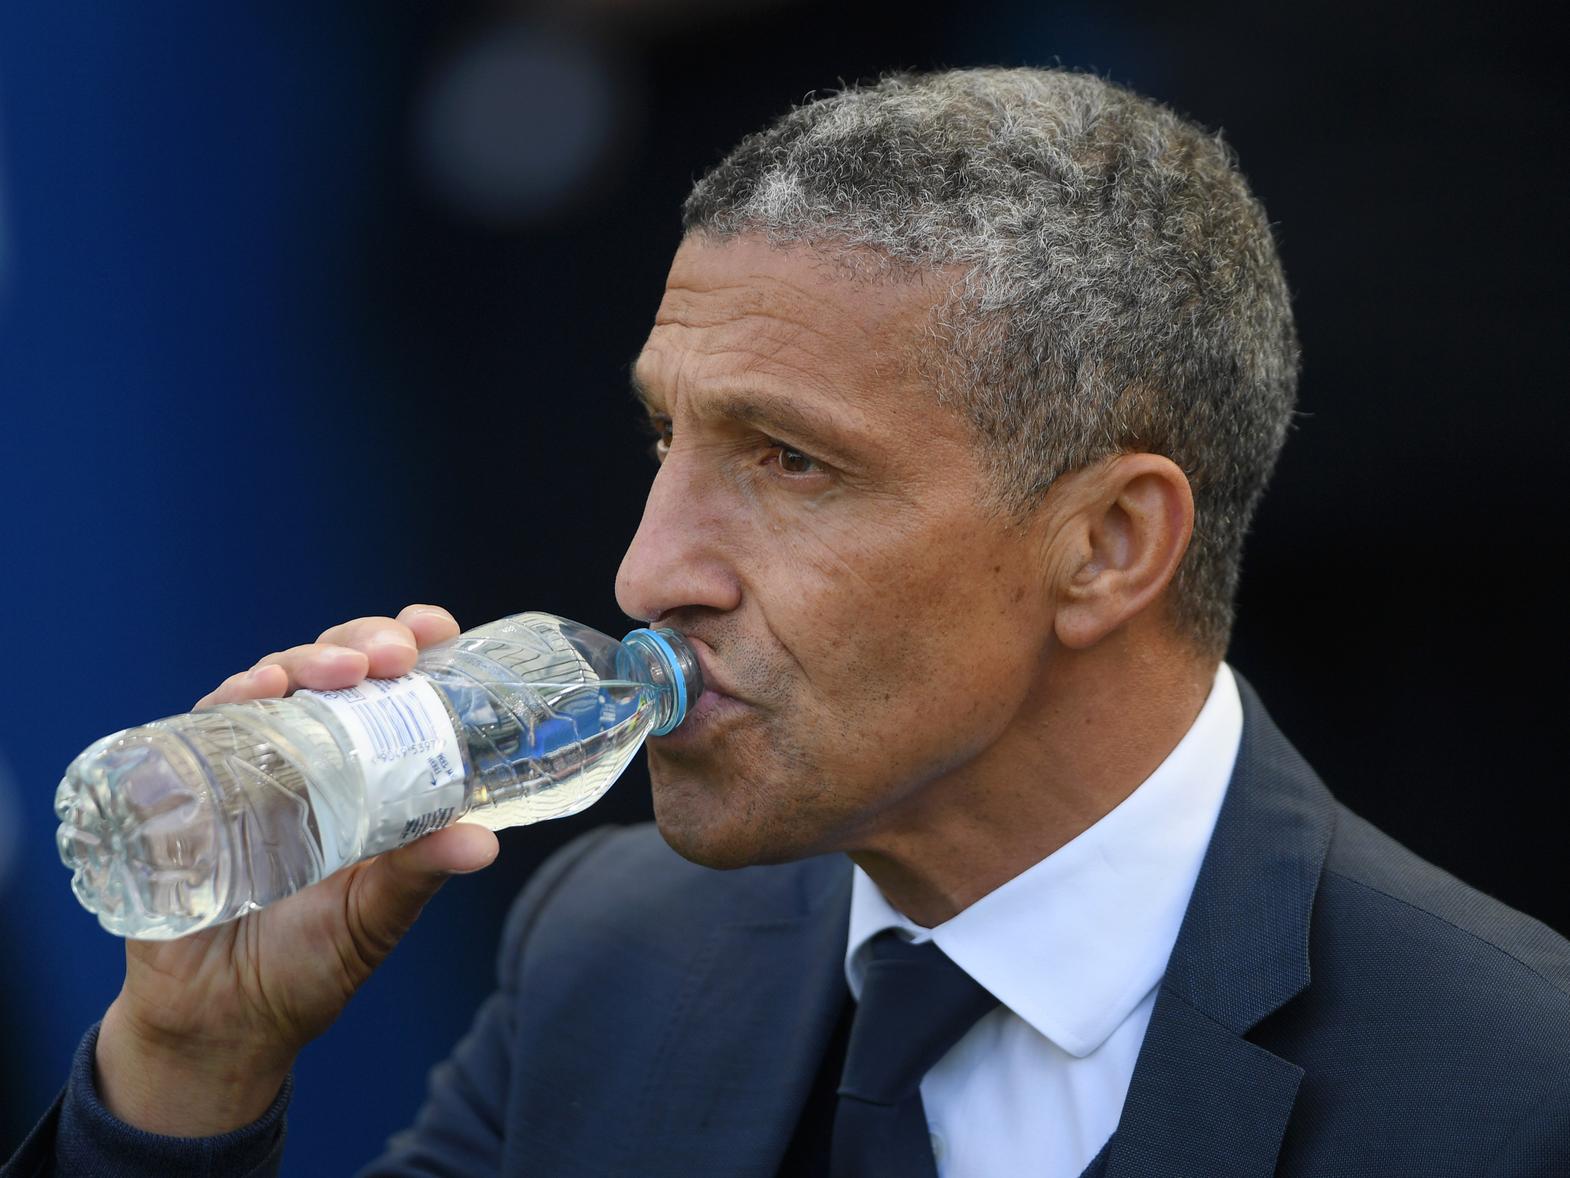 Chris Hughton is said to have turned down the opportunity to become the new Stoke City manager, as their under-fire boss Nathan Jones looks to be edging closer to an exit. (Daily Mail)